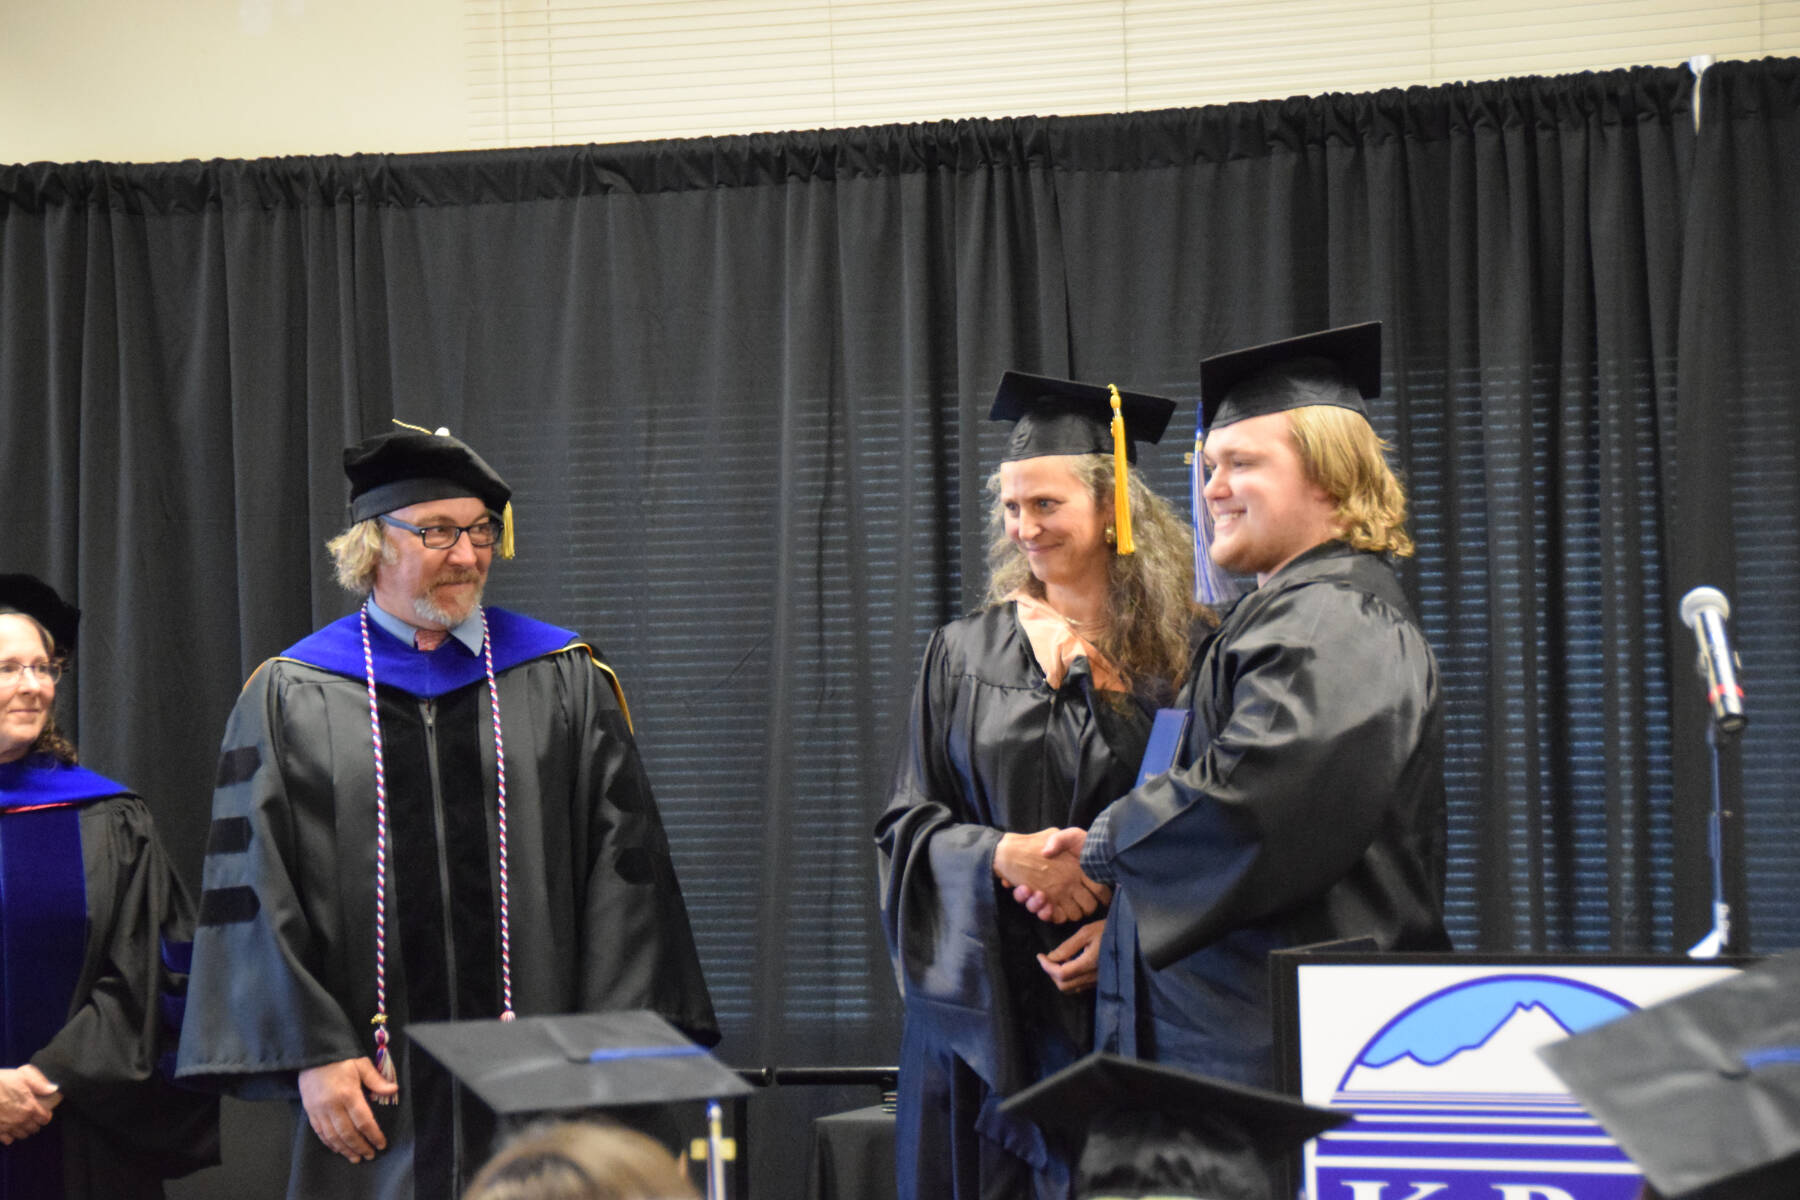 Tanner Saulls (right) is awarded his high school equivalency diploma by Kachemak Bay Campus Adult Education Coordinator Michelle Waclawski (center) during the 2023 KBC Commencement on Wednesday, May 10, 2023, in Homer, Alaska. (Photo by Delcenia Cosman/Homer News)